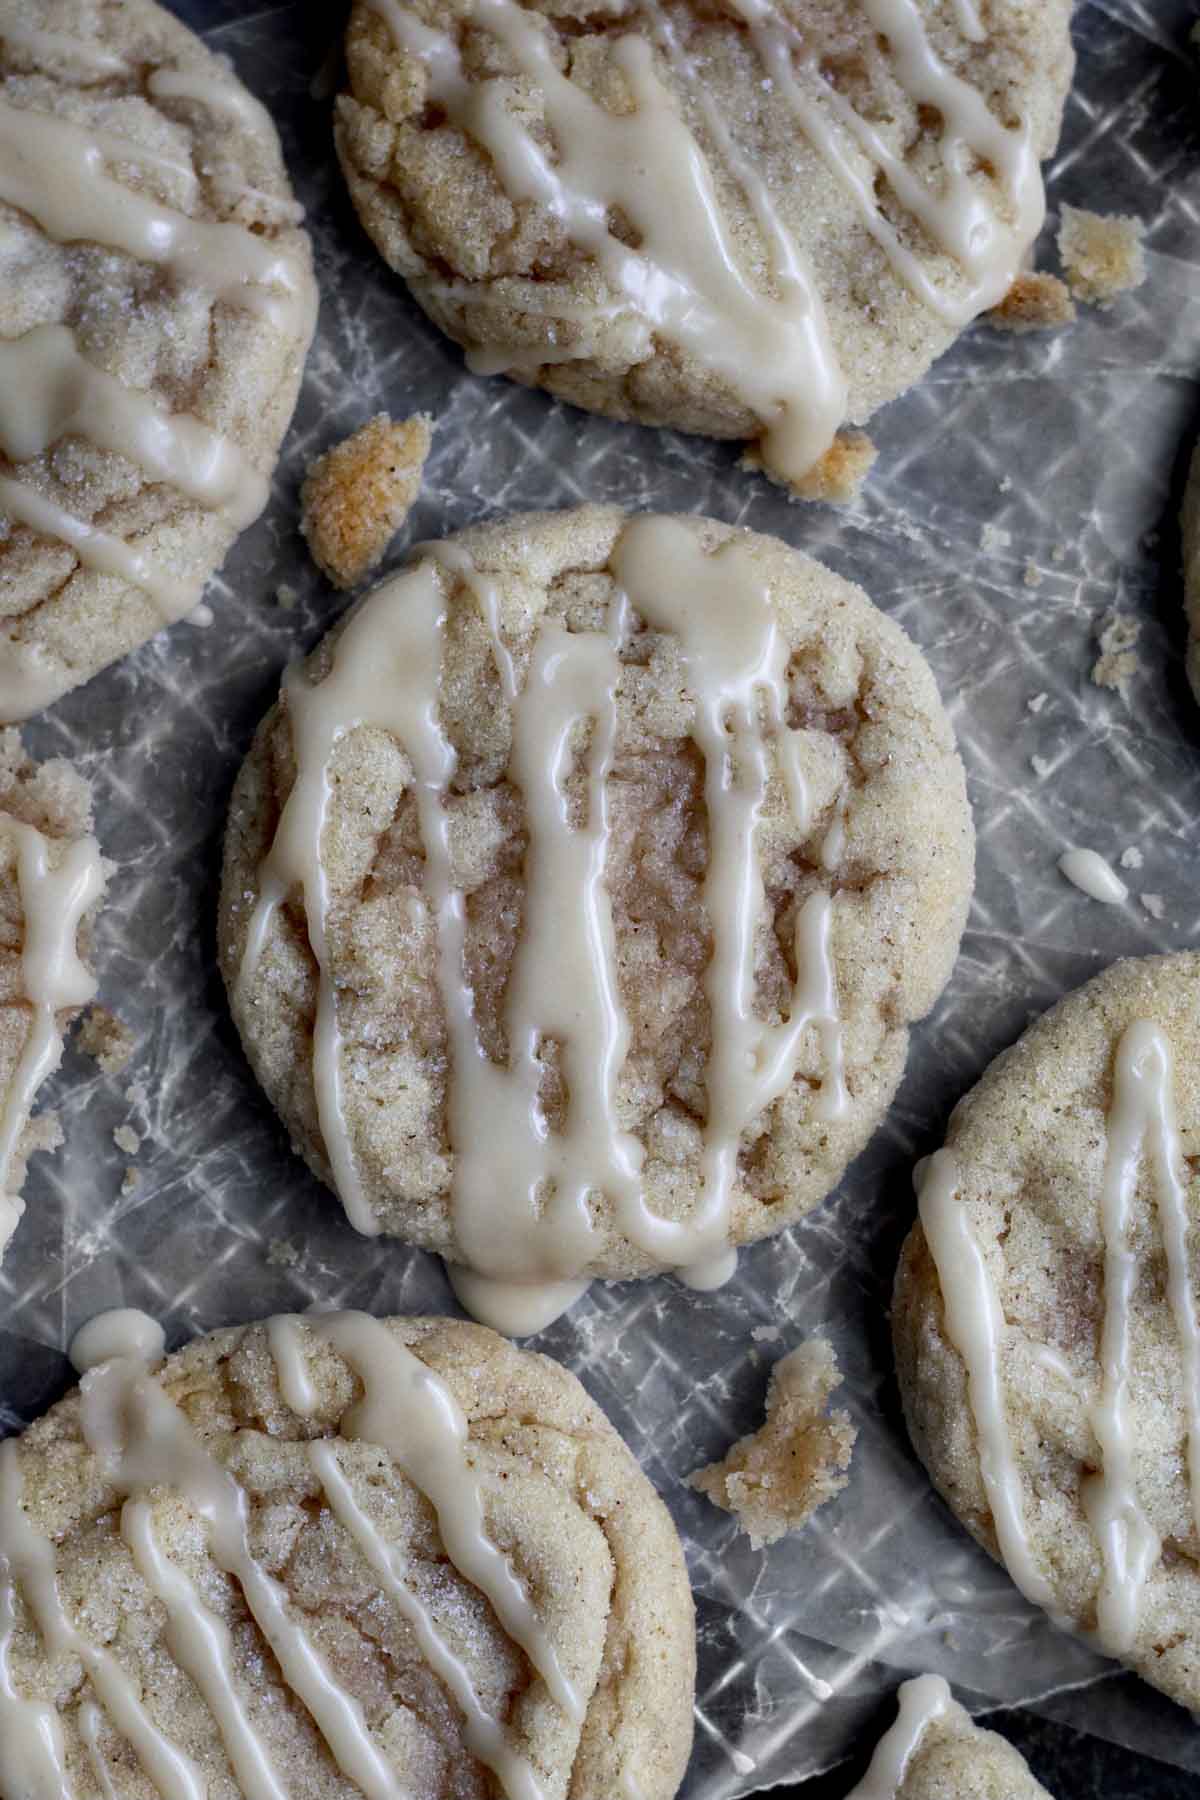 Close-up of an Apple Cinnamon Cookie.